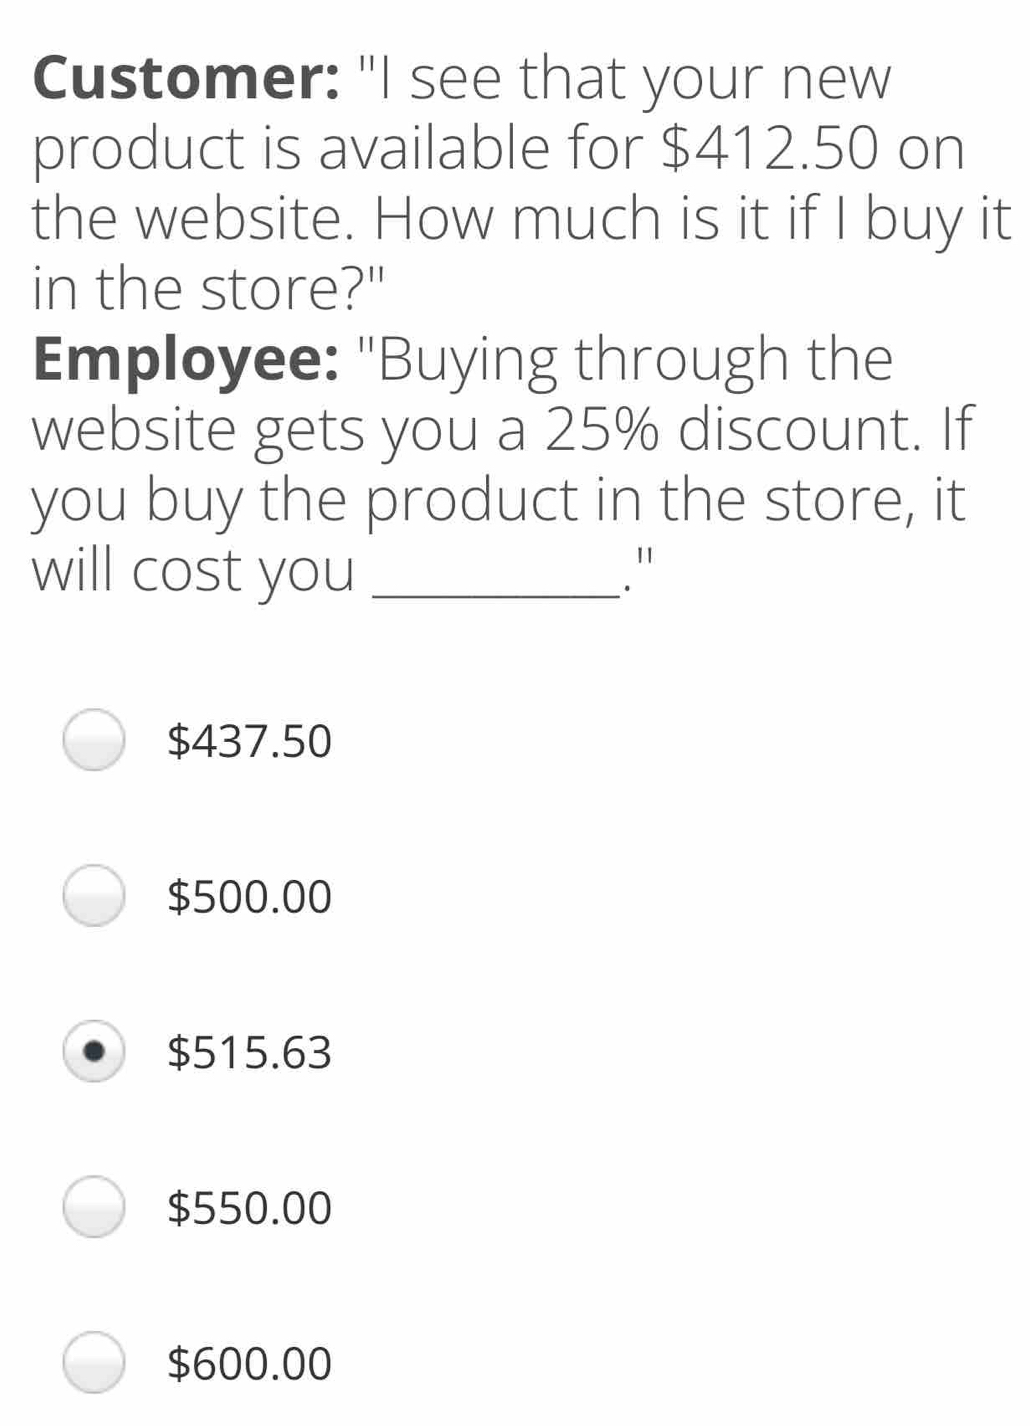 Customer: "I see that your new product is available for $ 412.50 on the website. How much is it if I buy it in the store?" Employee: "Buying through the website gets you a 25% discount. If you buy the product in the store, it will cost you _." $ 437.50 $ 500.00 $ 515.63 $ 550.00 $ 600.00